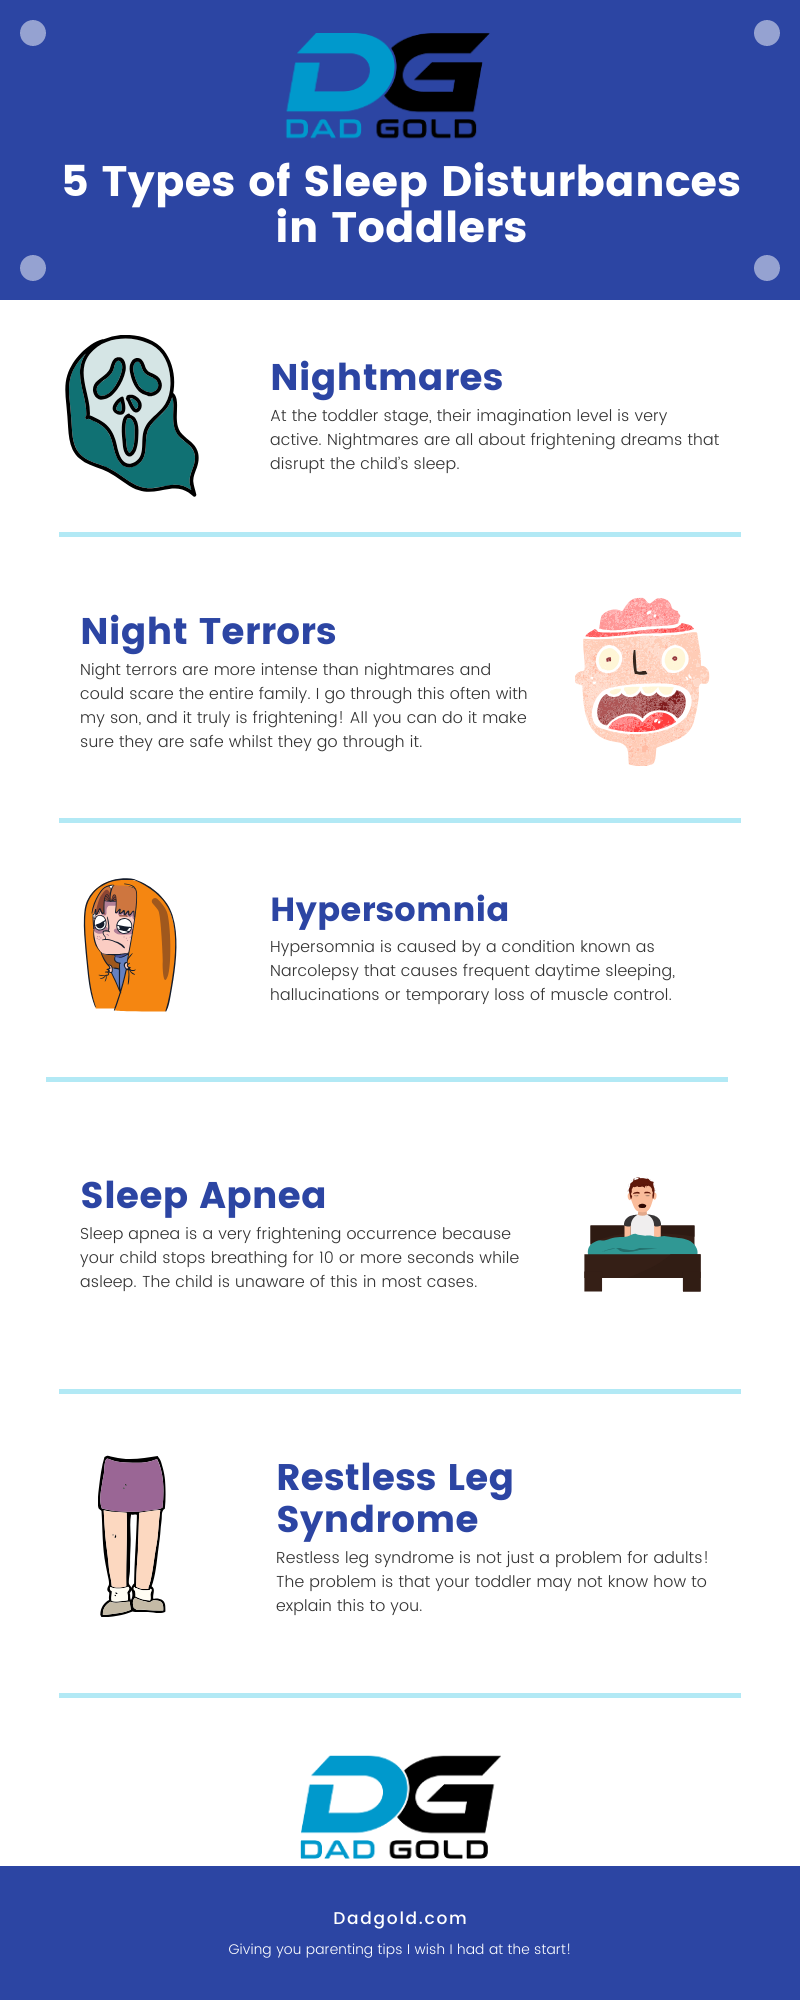 5 Types of Sleep disturbances in toddlers infographic